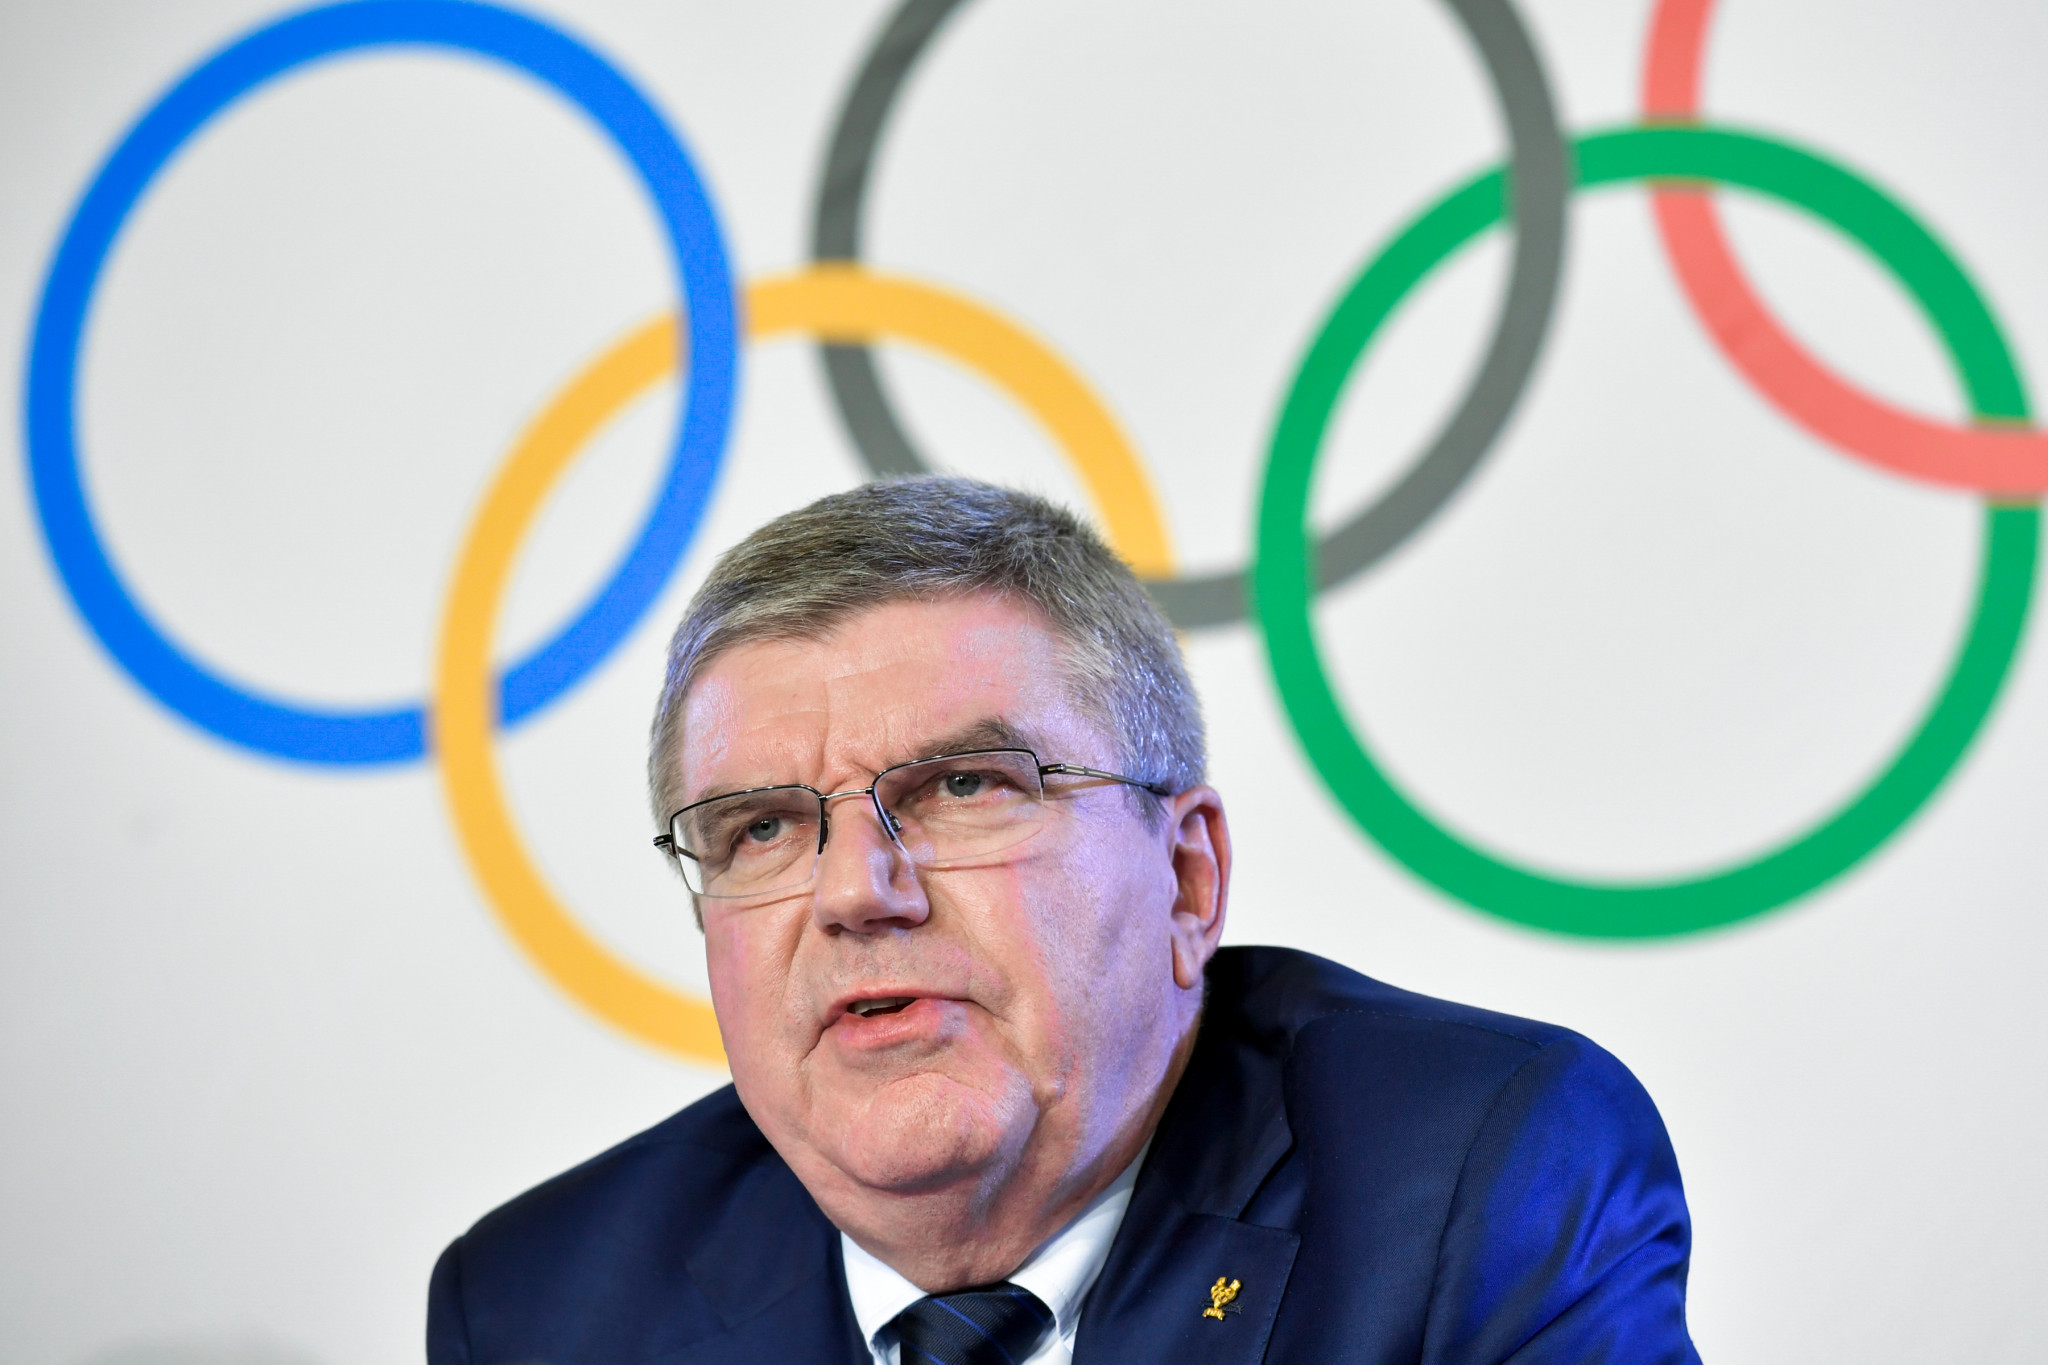 Thomas Bach called for the IOC to do more to address doping problems ©Getty Images